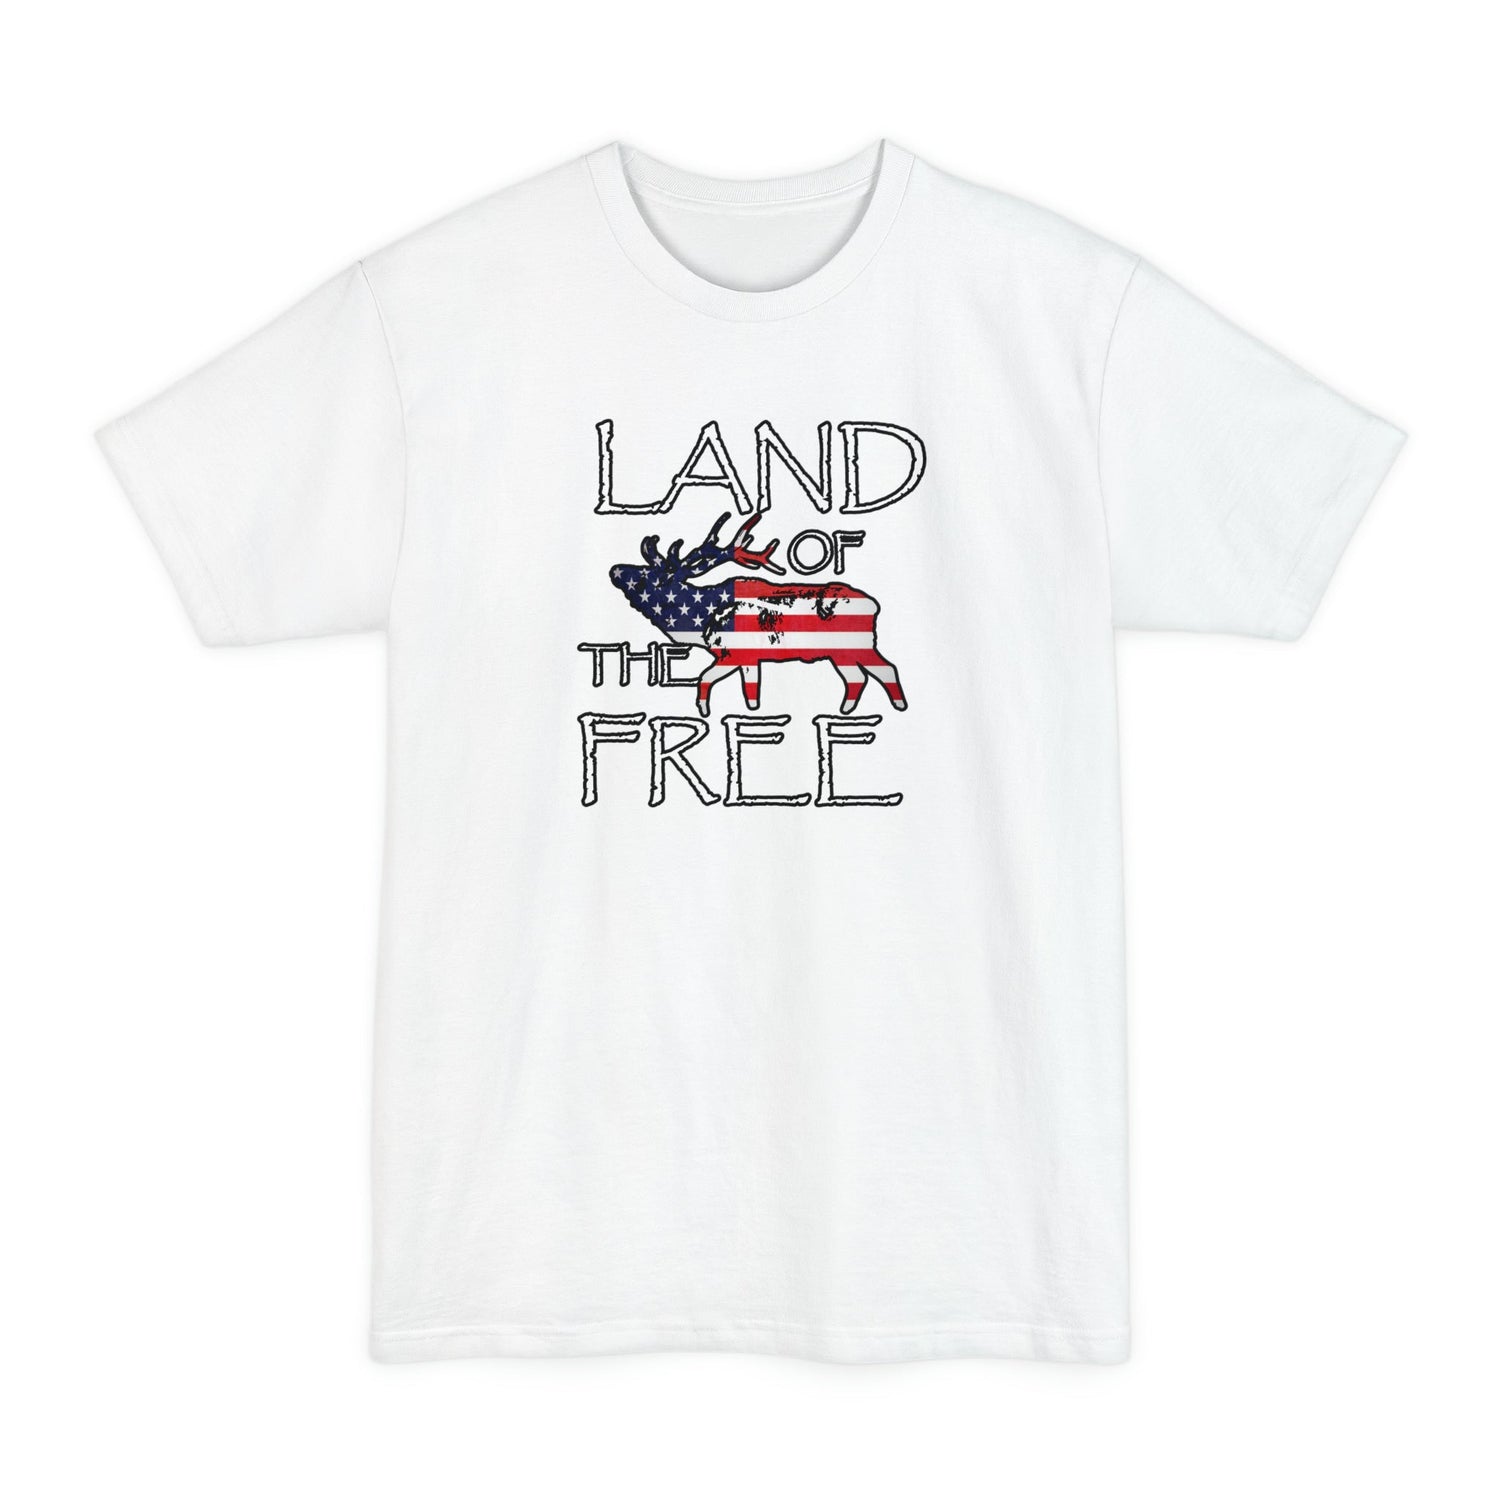 Big and tall patriotic elk hunting t-shirt, color white, front design placement